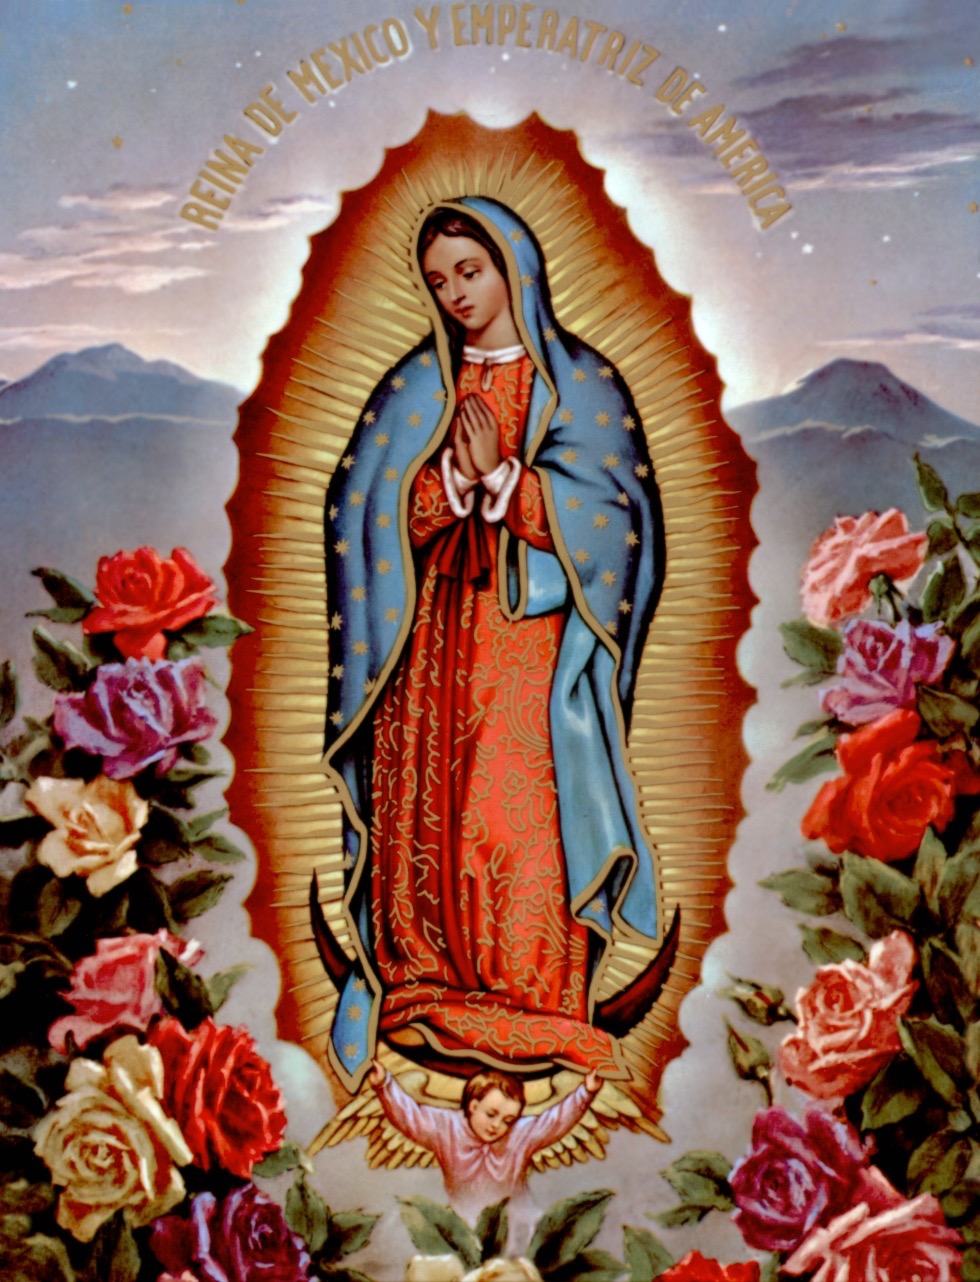 Guadalupe Virgin Mary Memes - Imgflip.